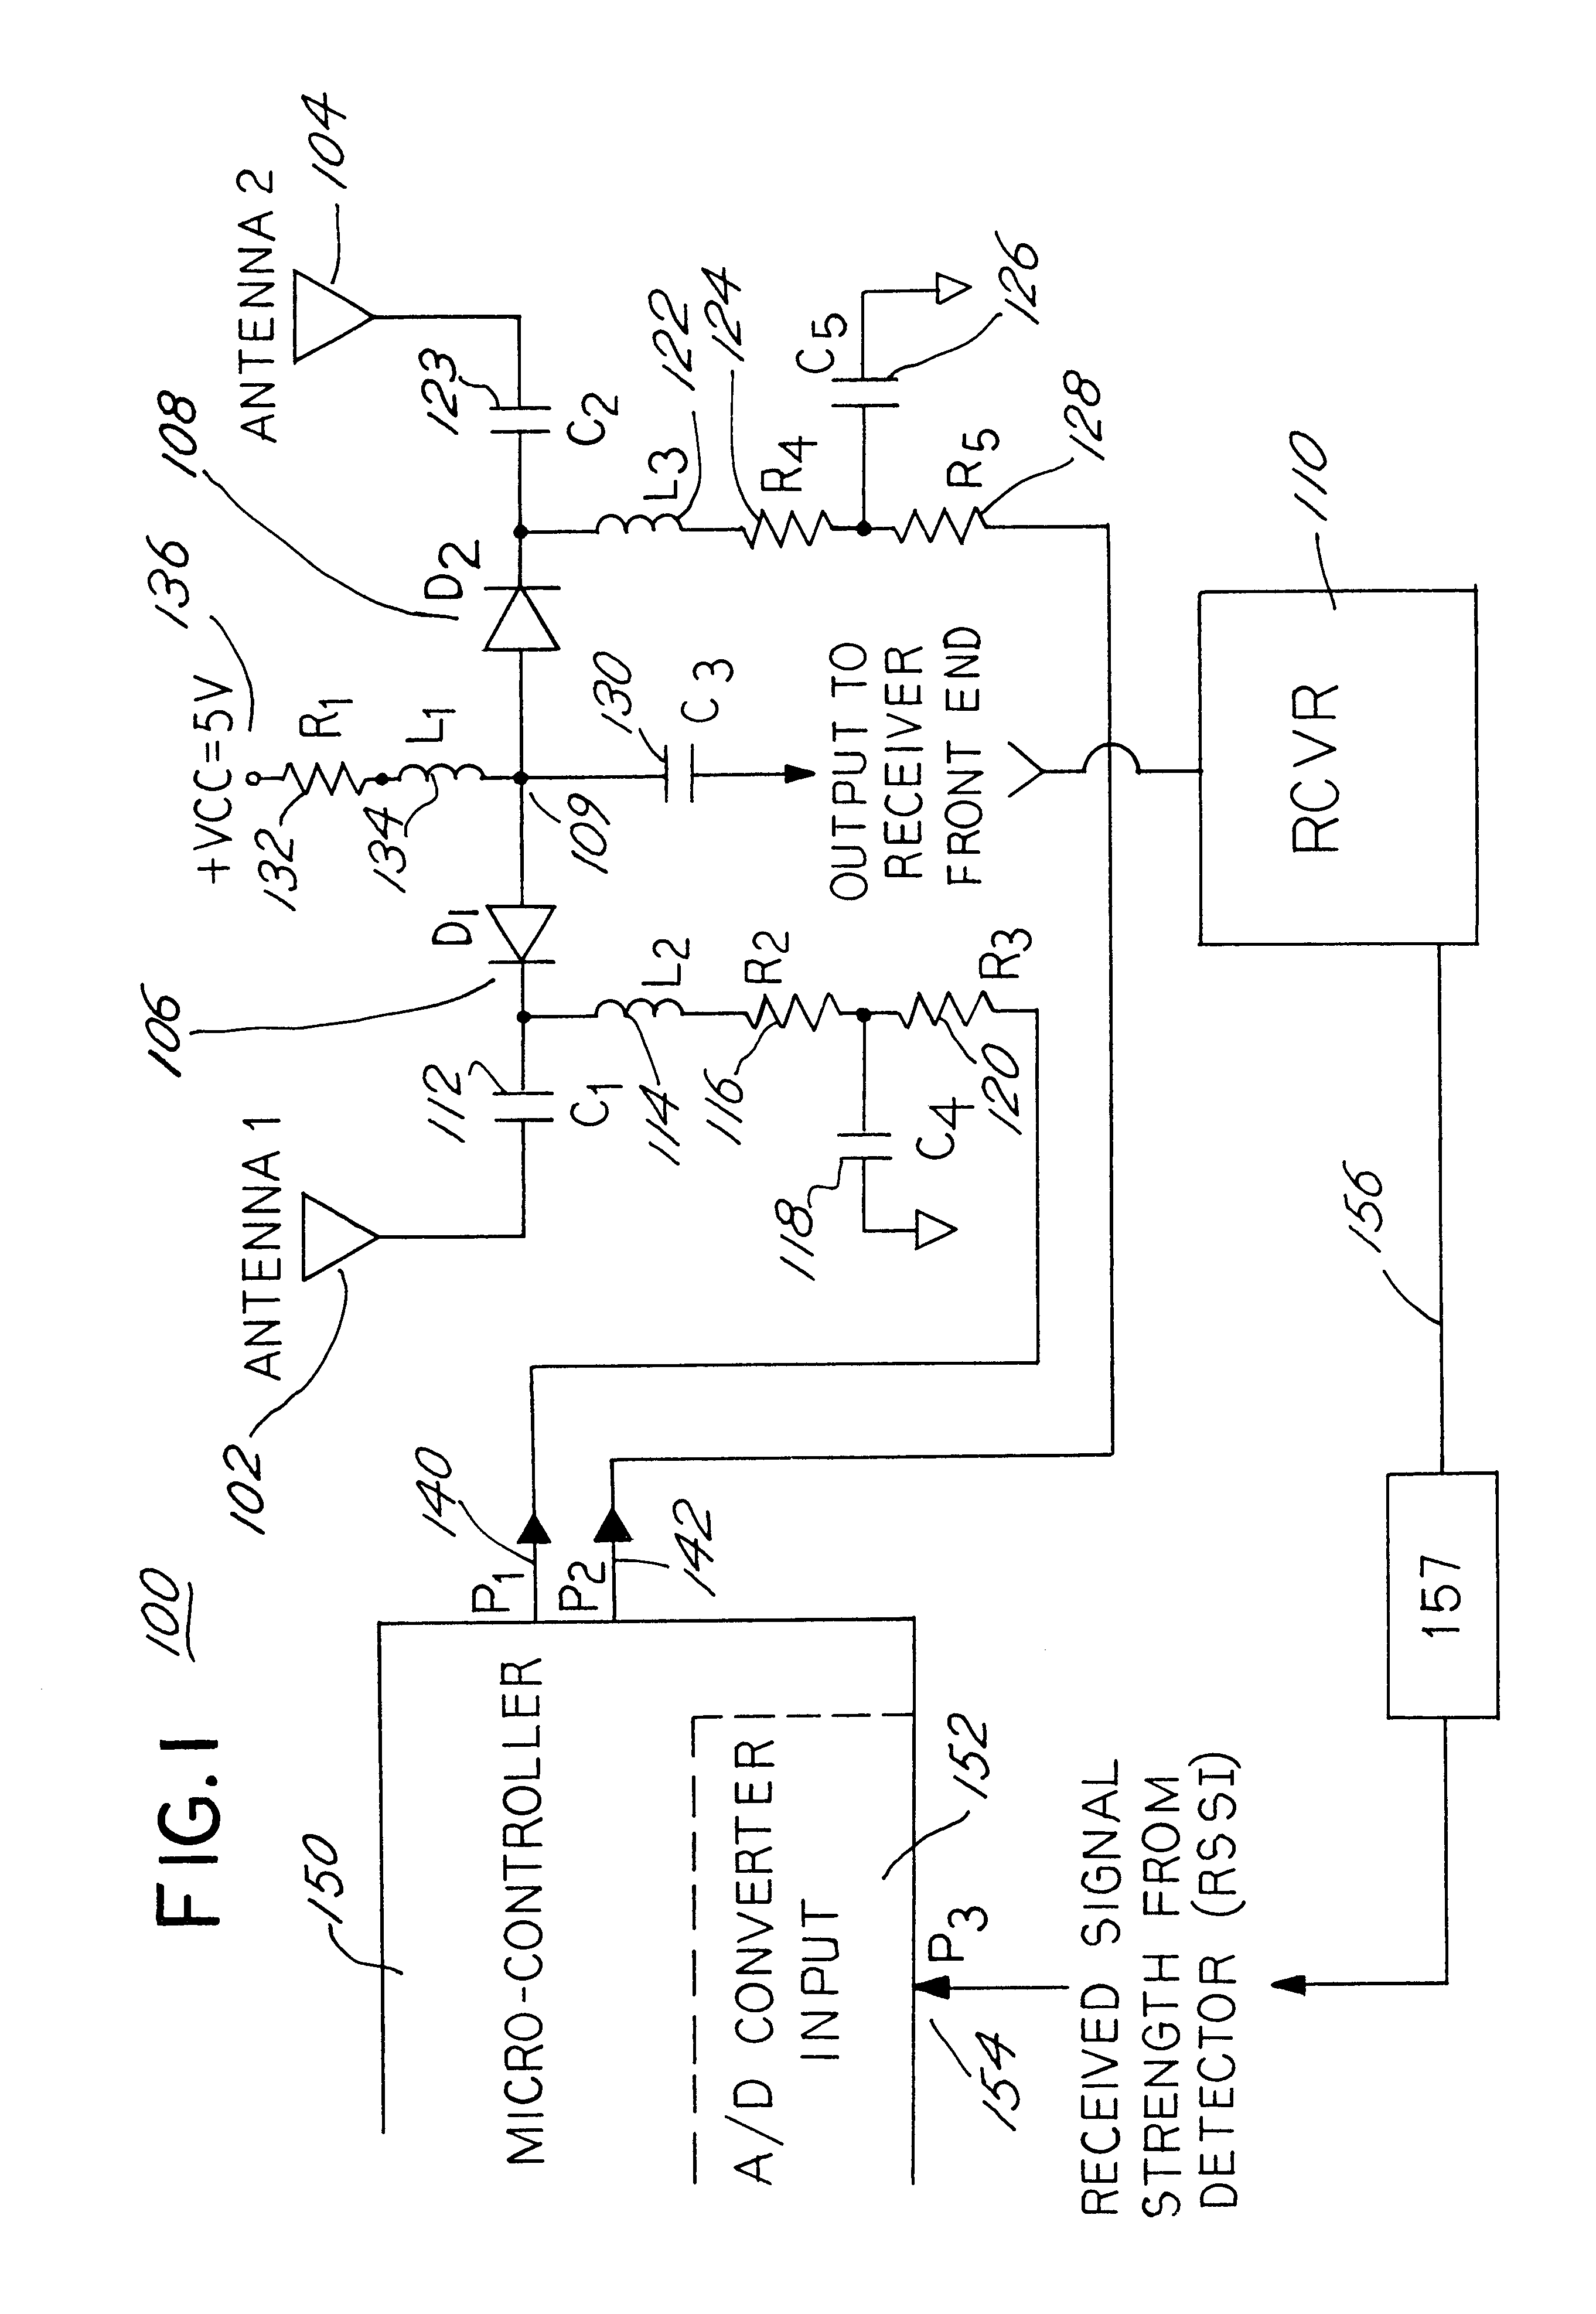 Method and apparatus for predictably switching diversity antennas on signal dropout